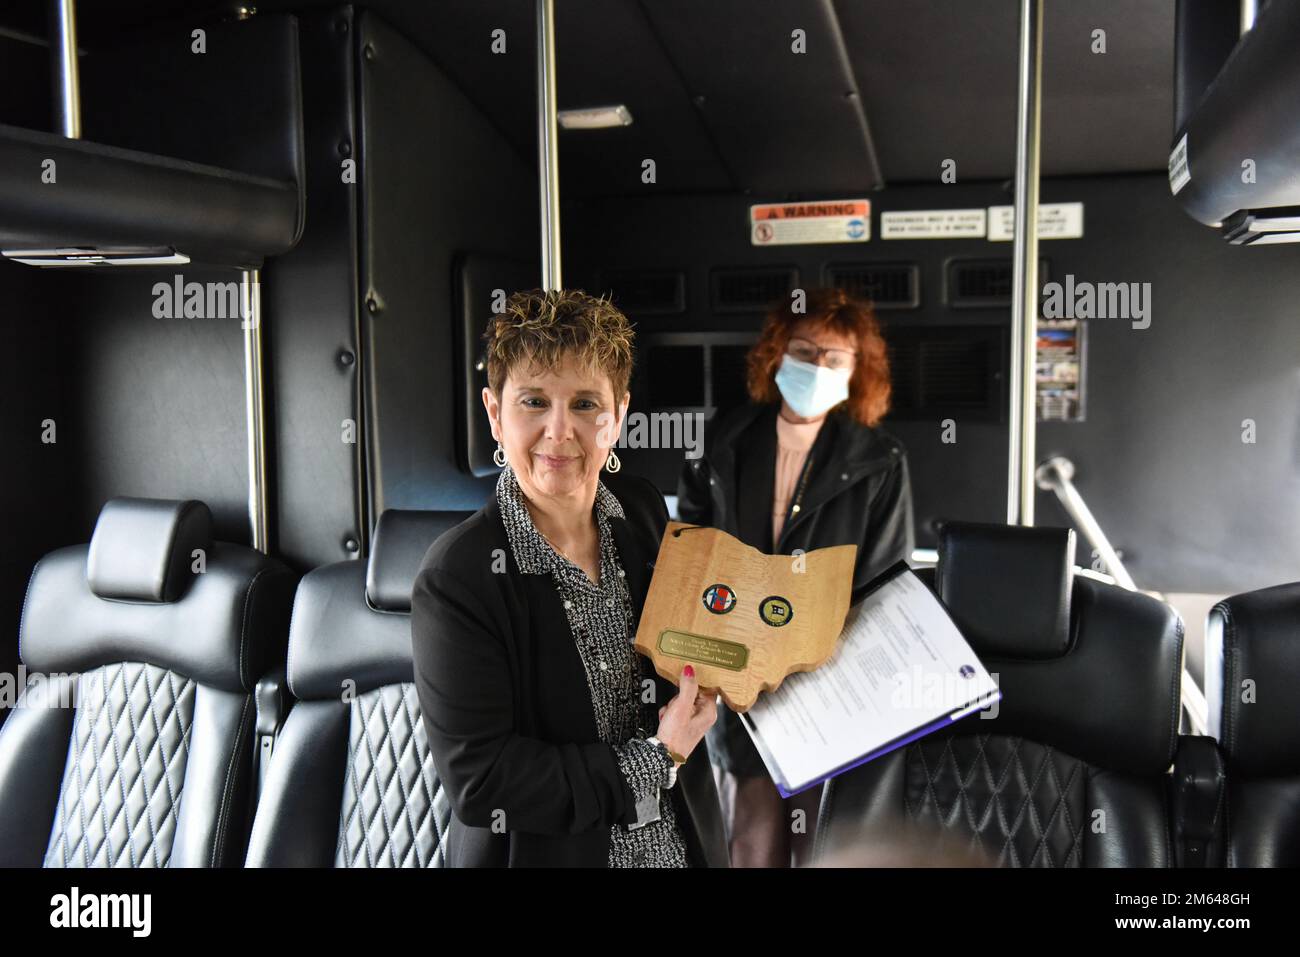 Dr. Marla E. Pérez-Davis, Director of the National Aeronautics and Space Administration's John H. Glenn Research Center, poses for a photo on the tour bus at the NASA Glenn Research Center in Cleveland, Ohio, March 30, 2022. The commander of the U.S. Coast Guard Ninth District presented Dr. Pérez-Davis with a plaque as a token of appreciation for inviting members of the Coast Guard on the tour. Stock Photo